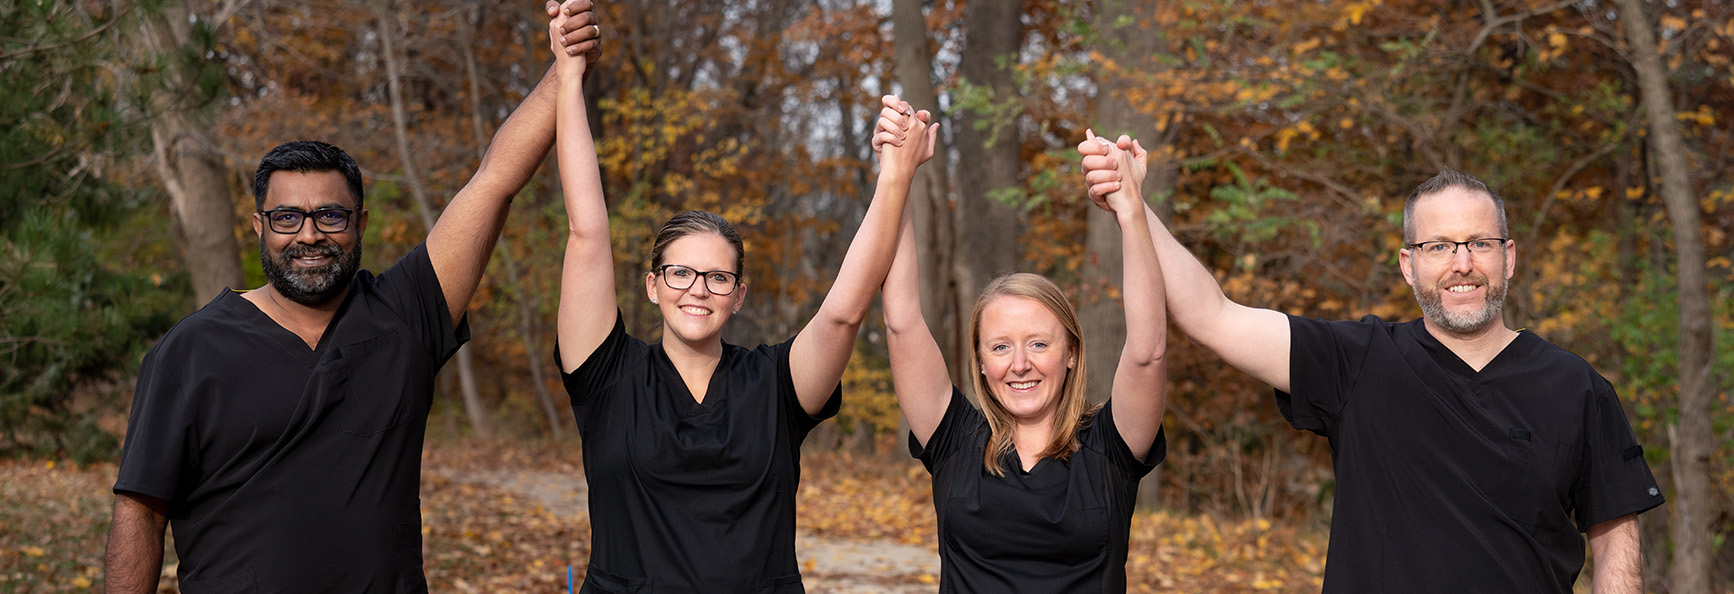 Clinical staff team with hands in air